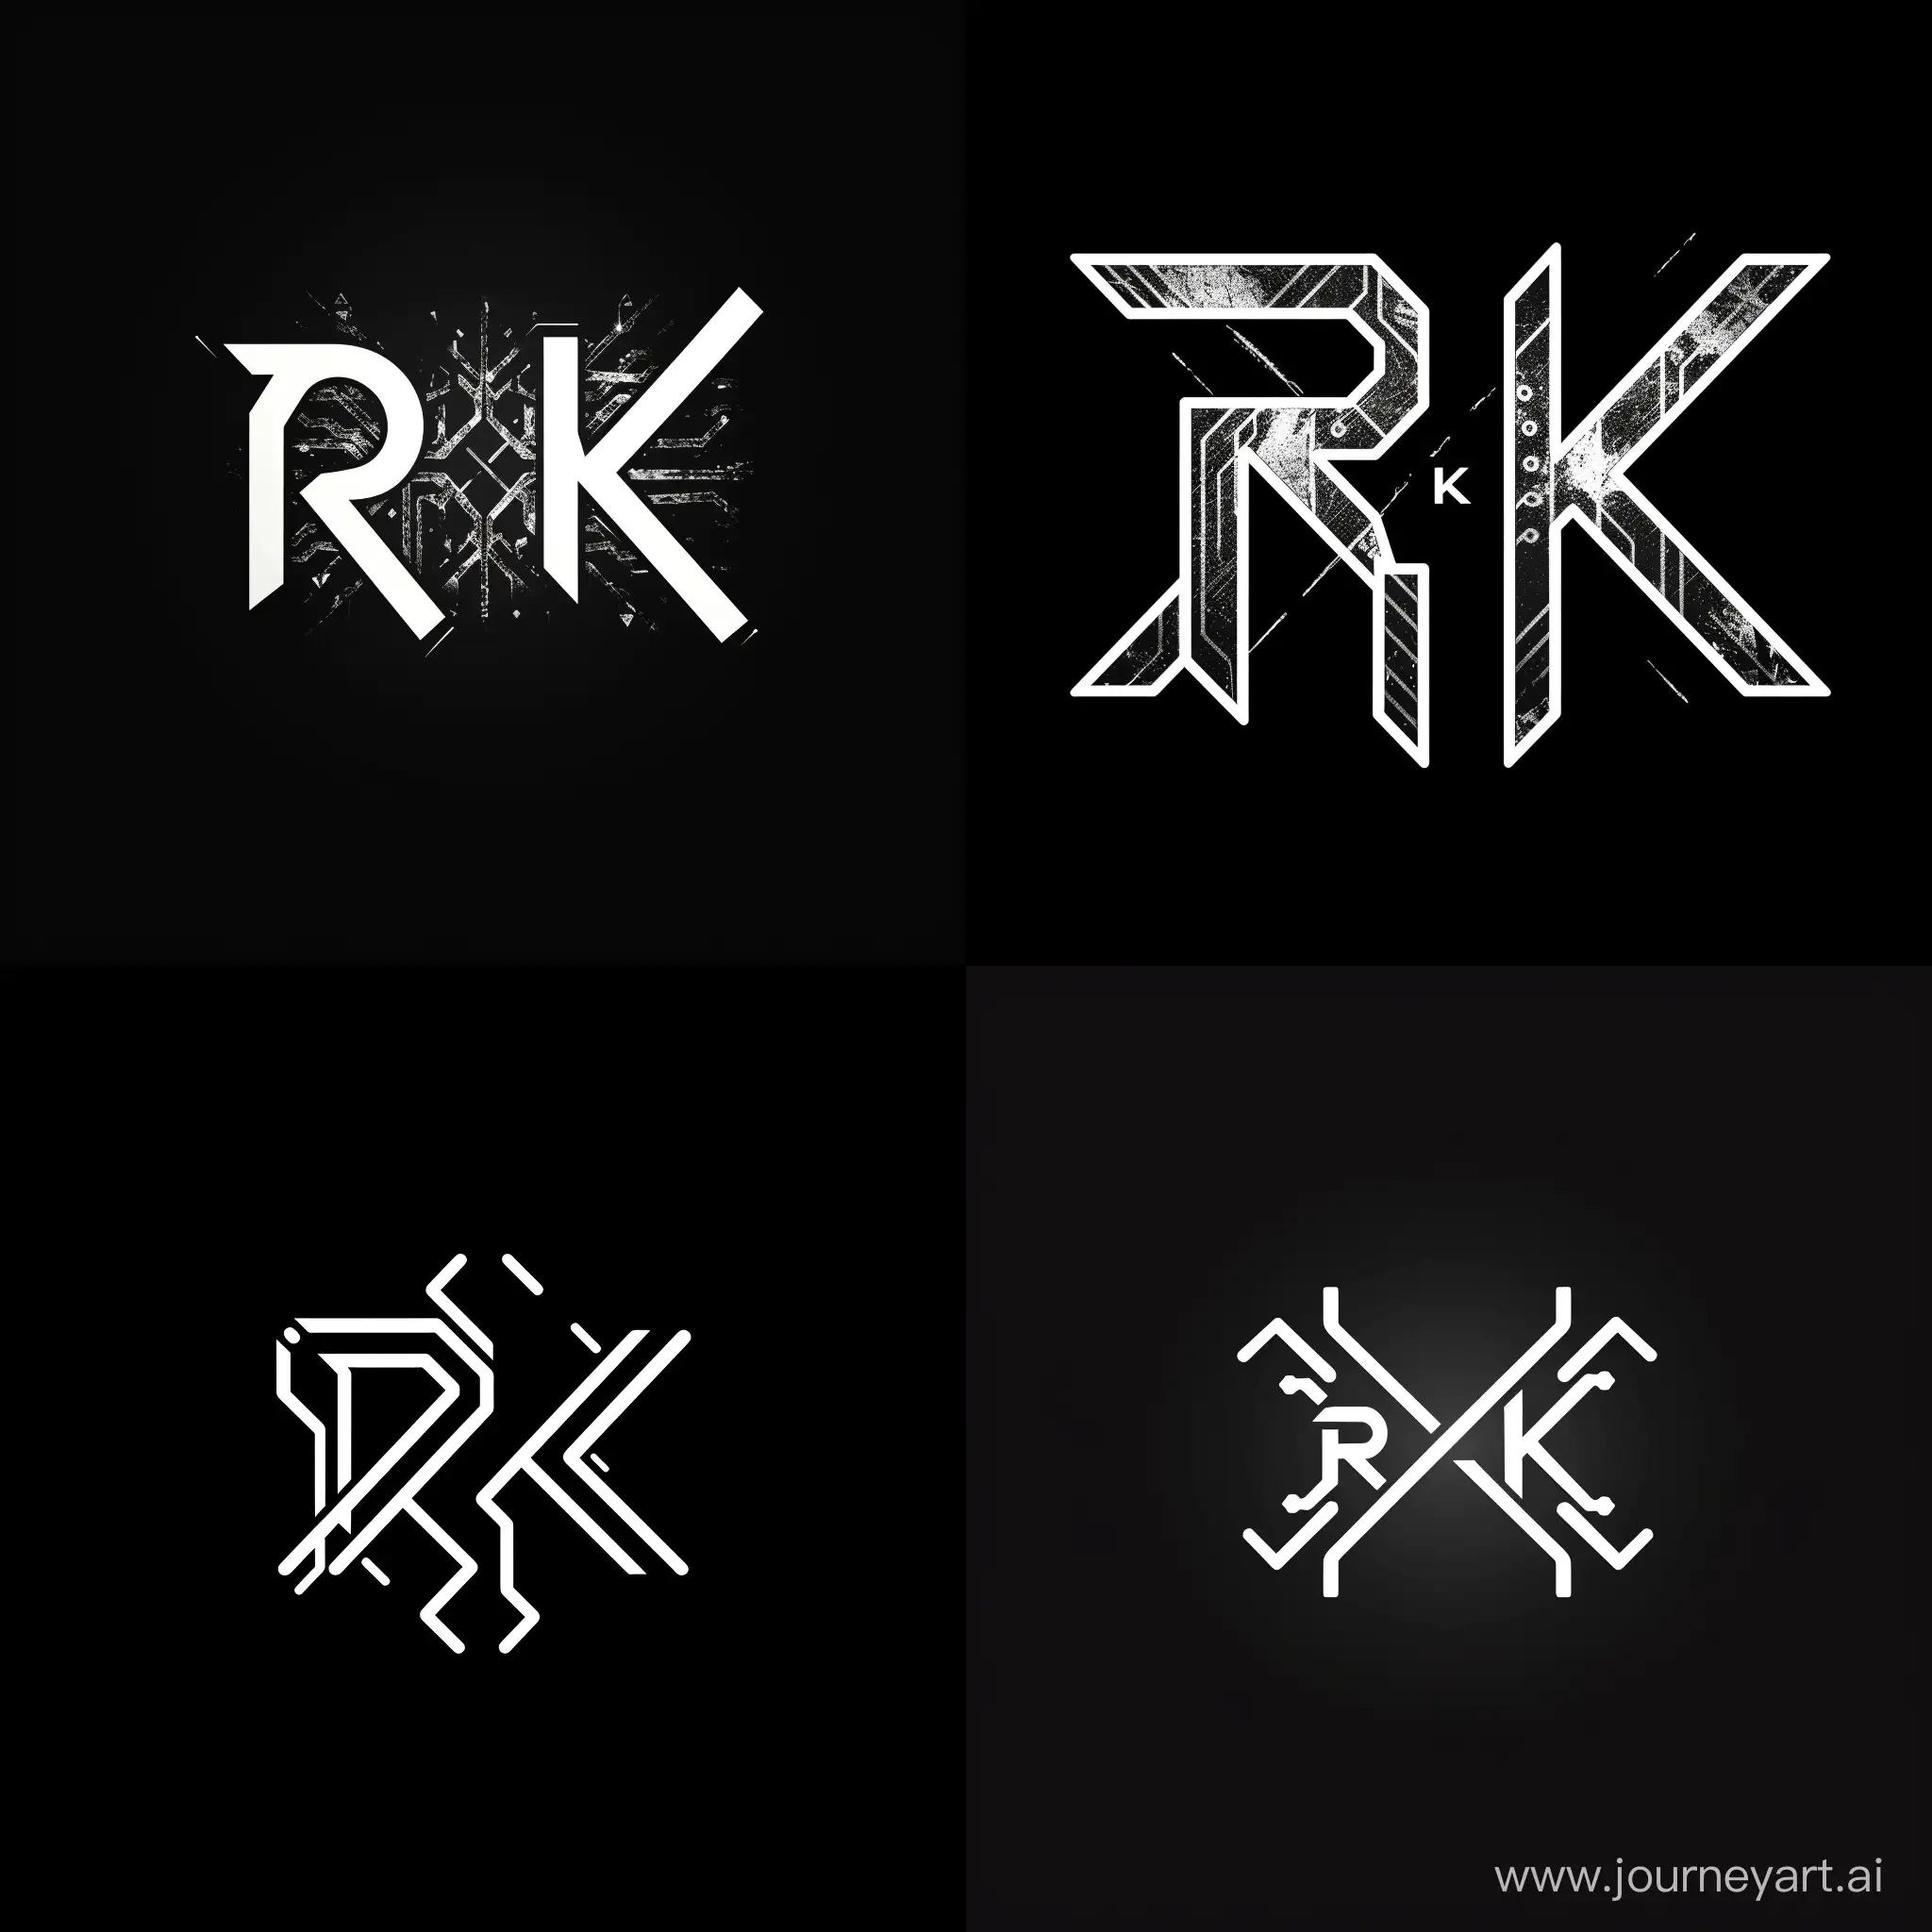 Futuristic-AI-Logo-Design-with-Crossed-RK-Letters-on-Black-Background